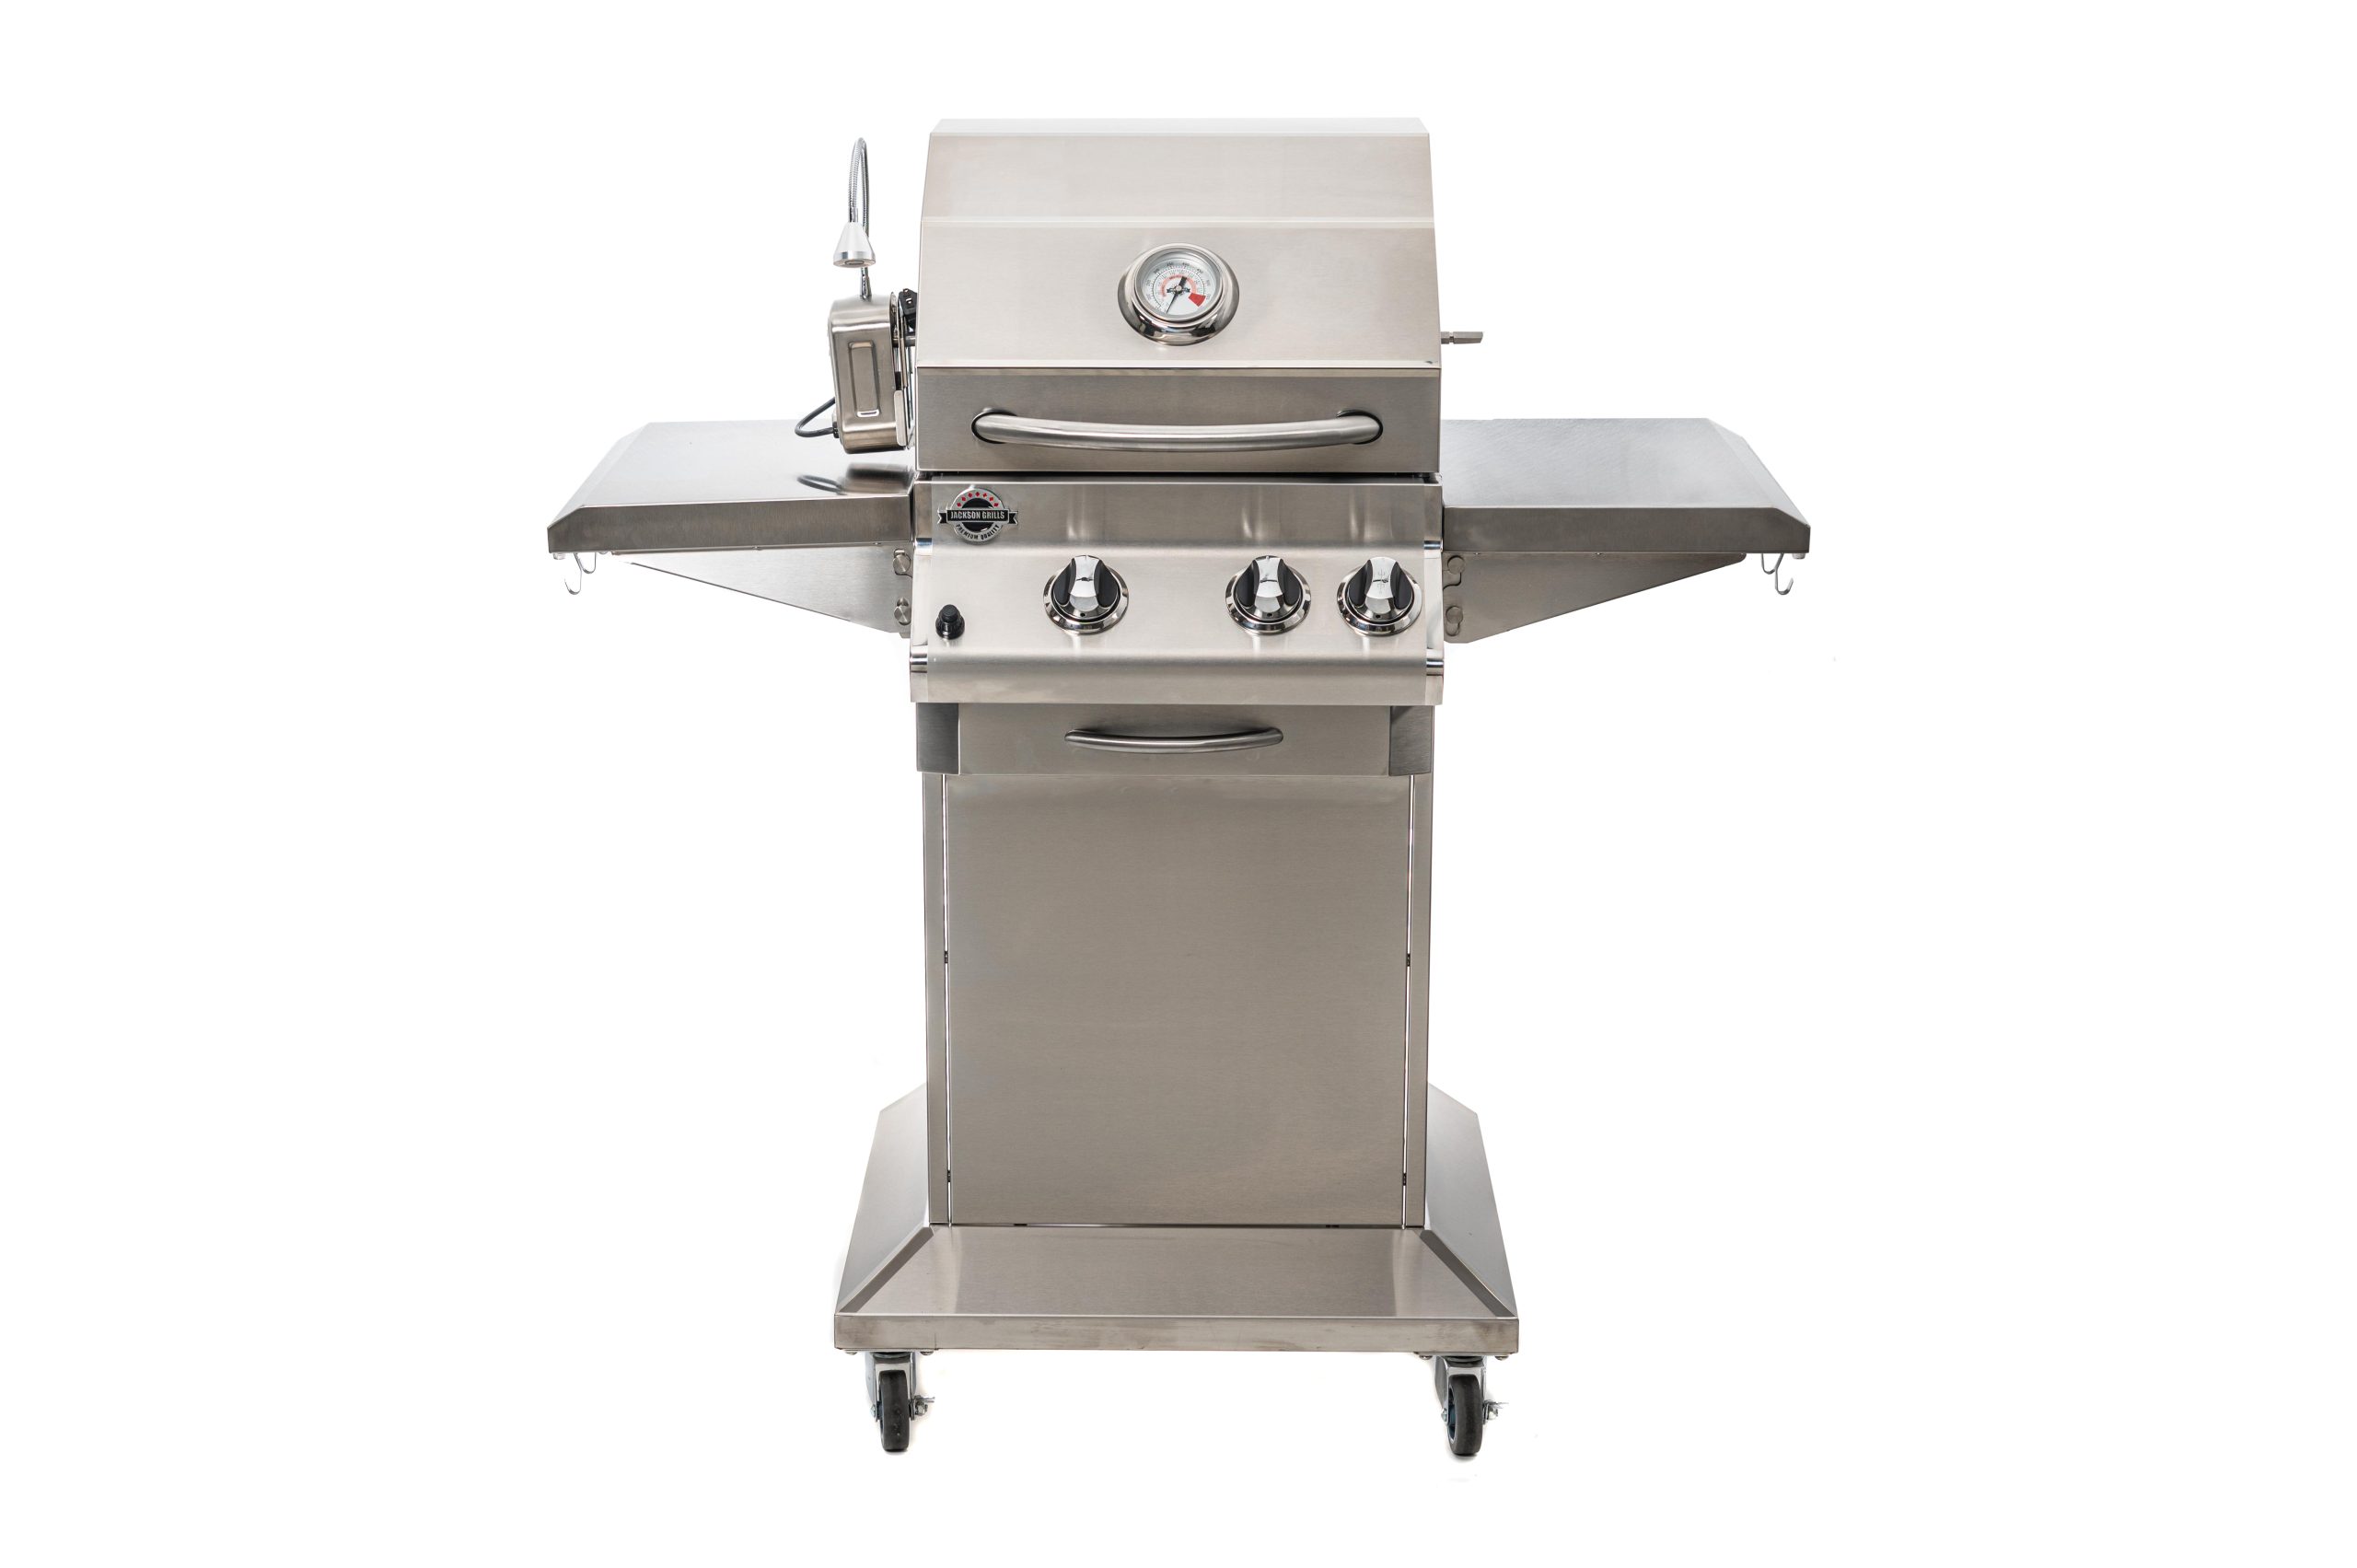 Jackson Grills - LUX 400 STAINLESS STEEL GAS GRILL CART